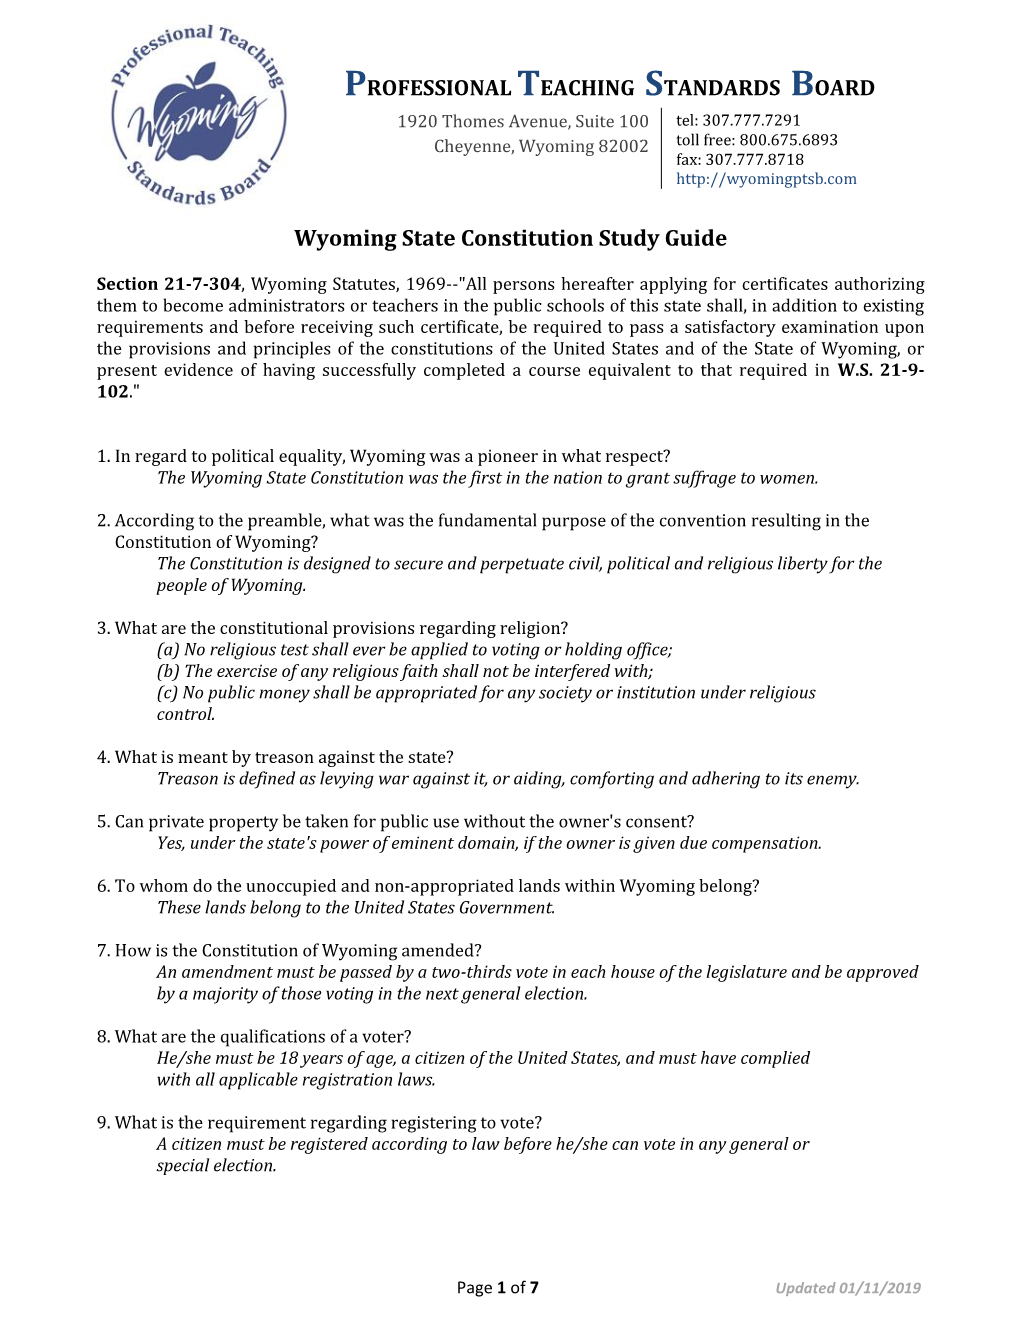 Wyoming State Constitution Study Guide